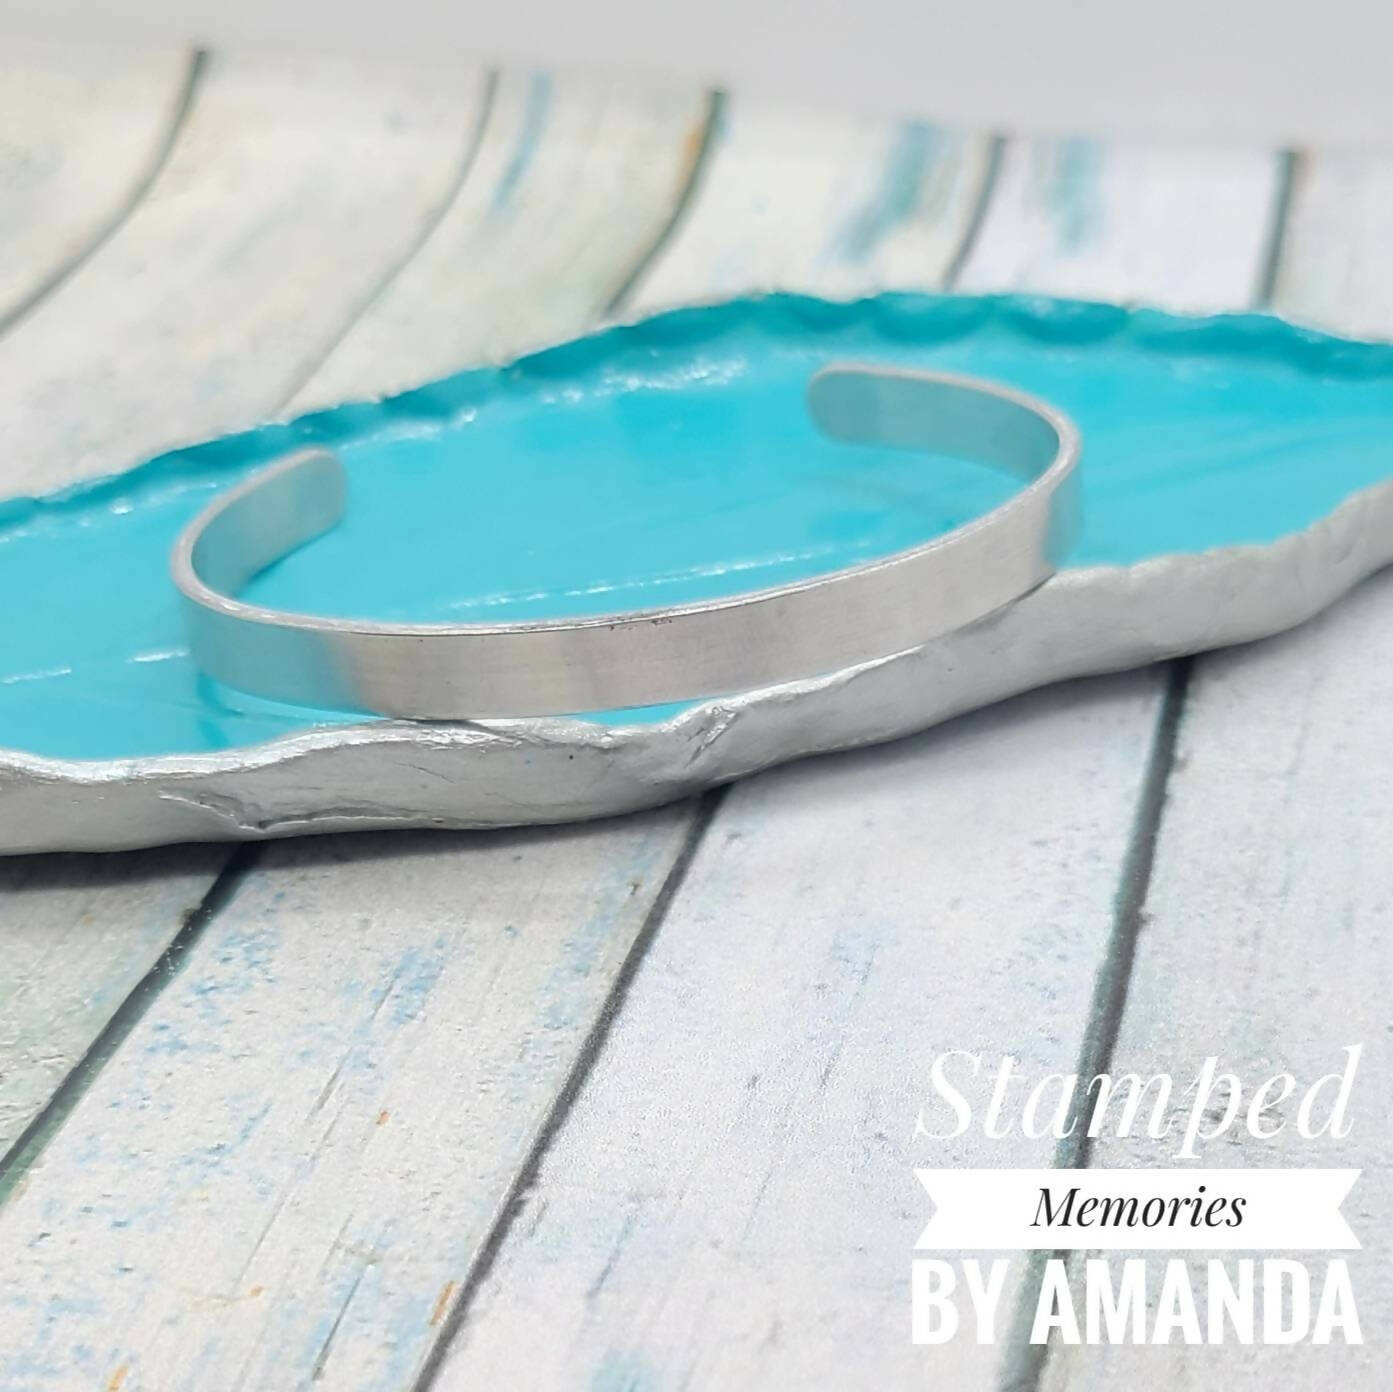 Stamped Memories by Amanda | Keep Fuc**ng going cuff bracelet